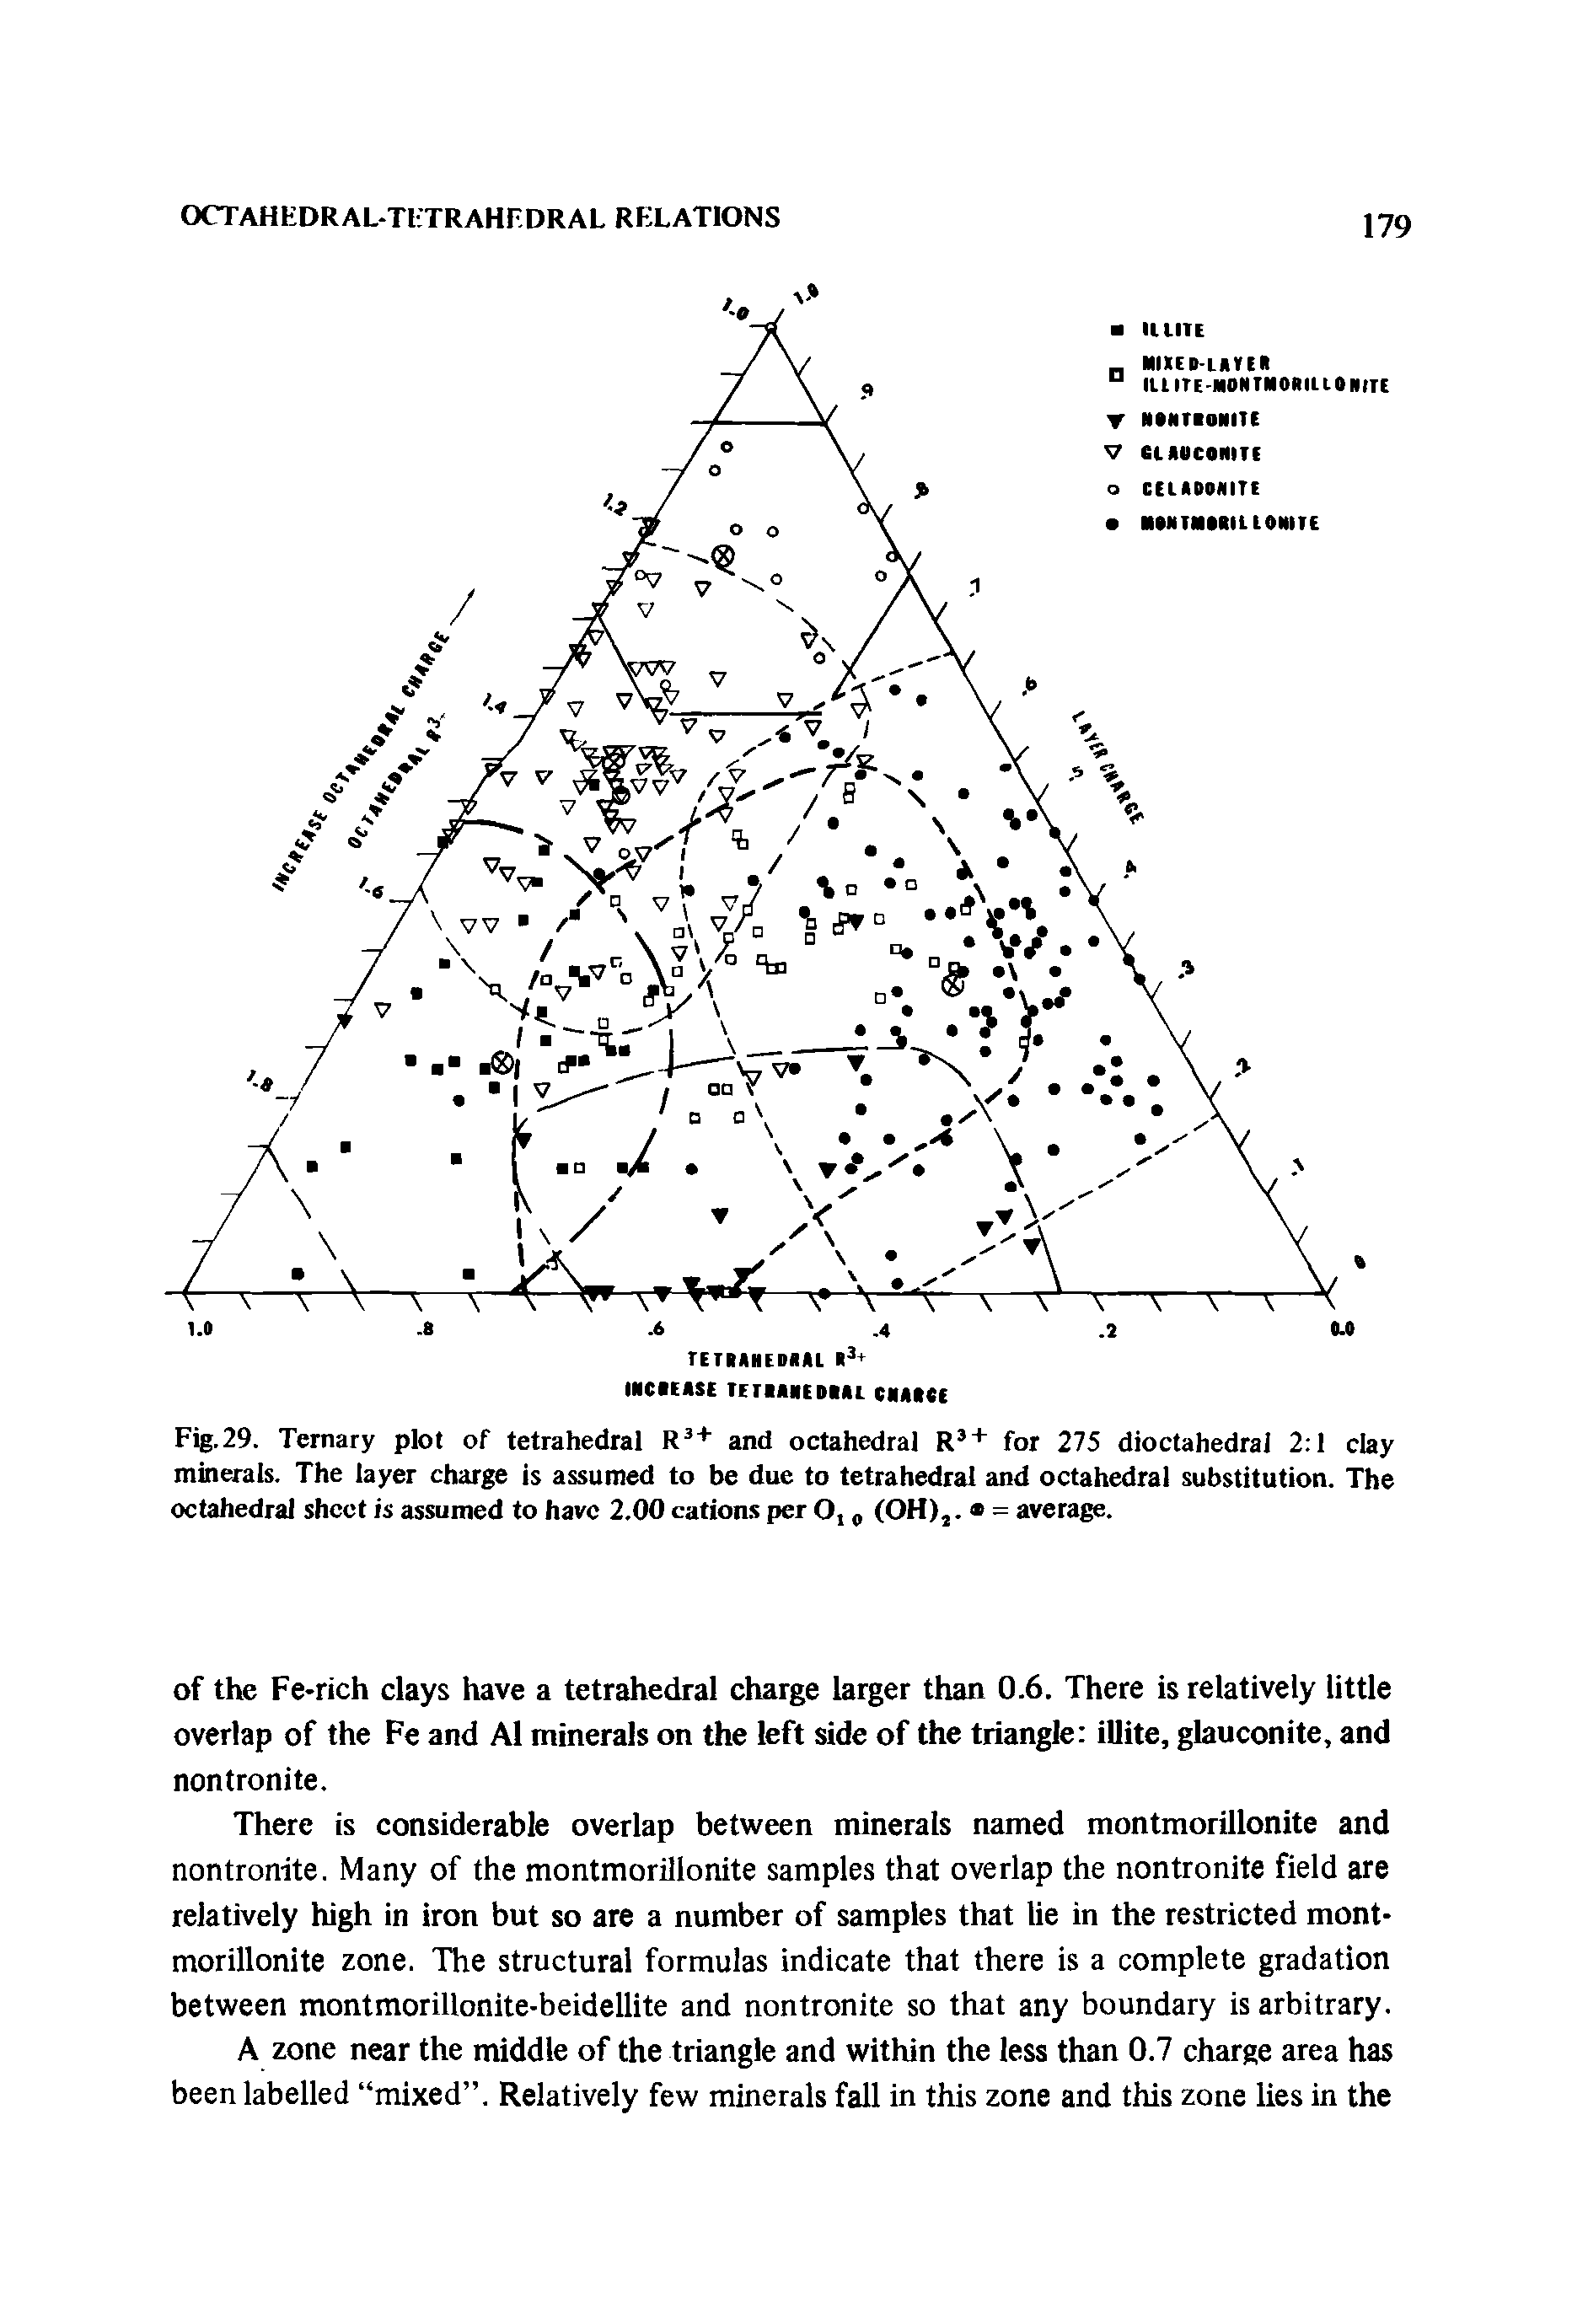 Fig.29. Ternary plot of tetrahedral R3+ and octahedral R3+ for 275 dioctahedral 2 1 clay minerals. The layer charge is assumed to be due to tetrahedral and octahedral substitution. The octahedral sheet is assumed to have 2.00 cations per 0,0 (OH),. = average.